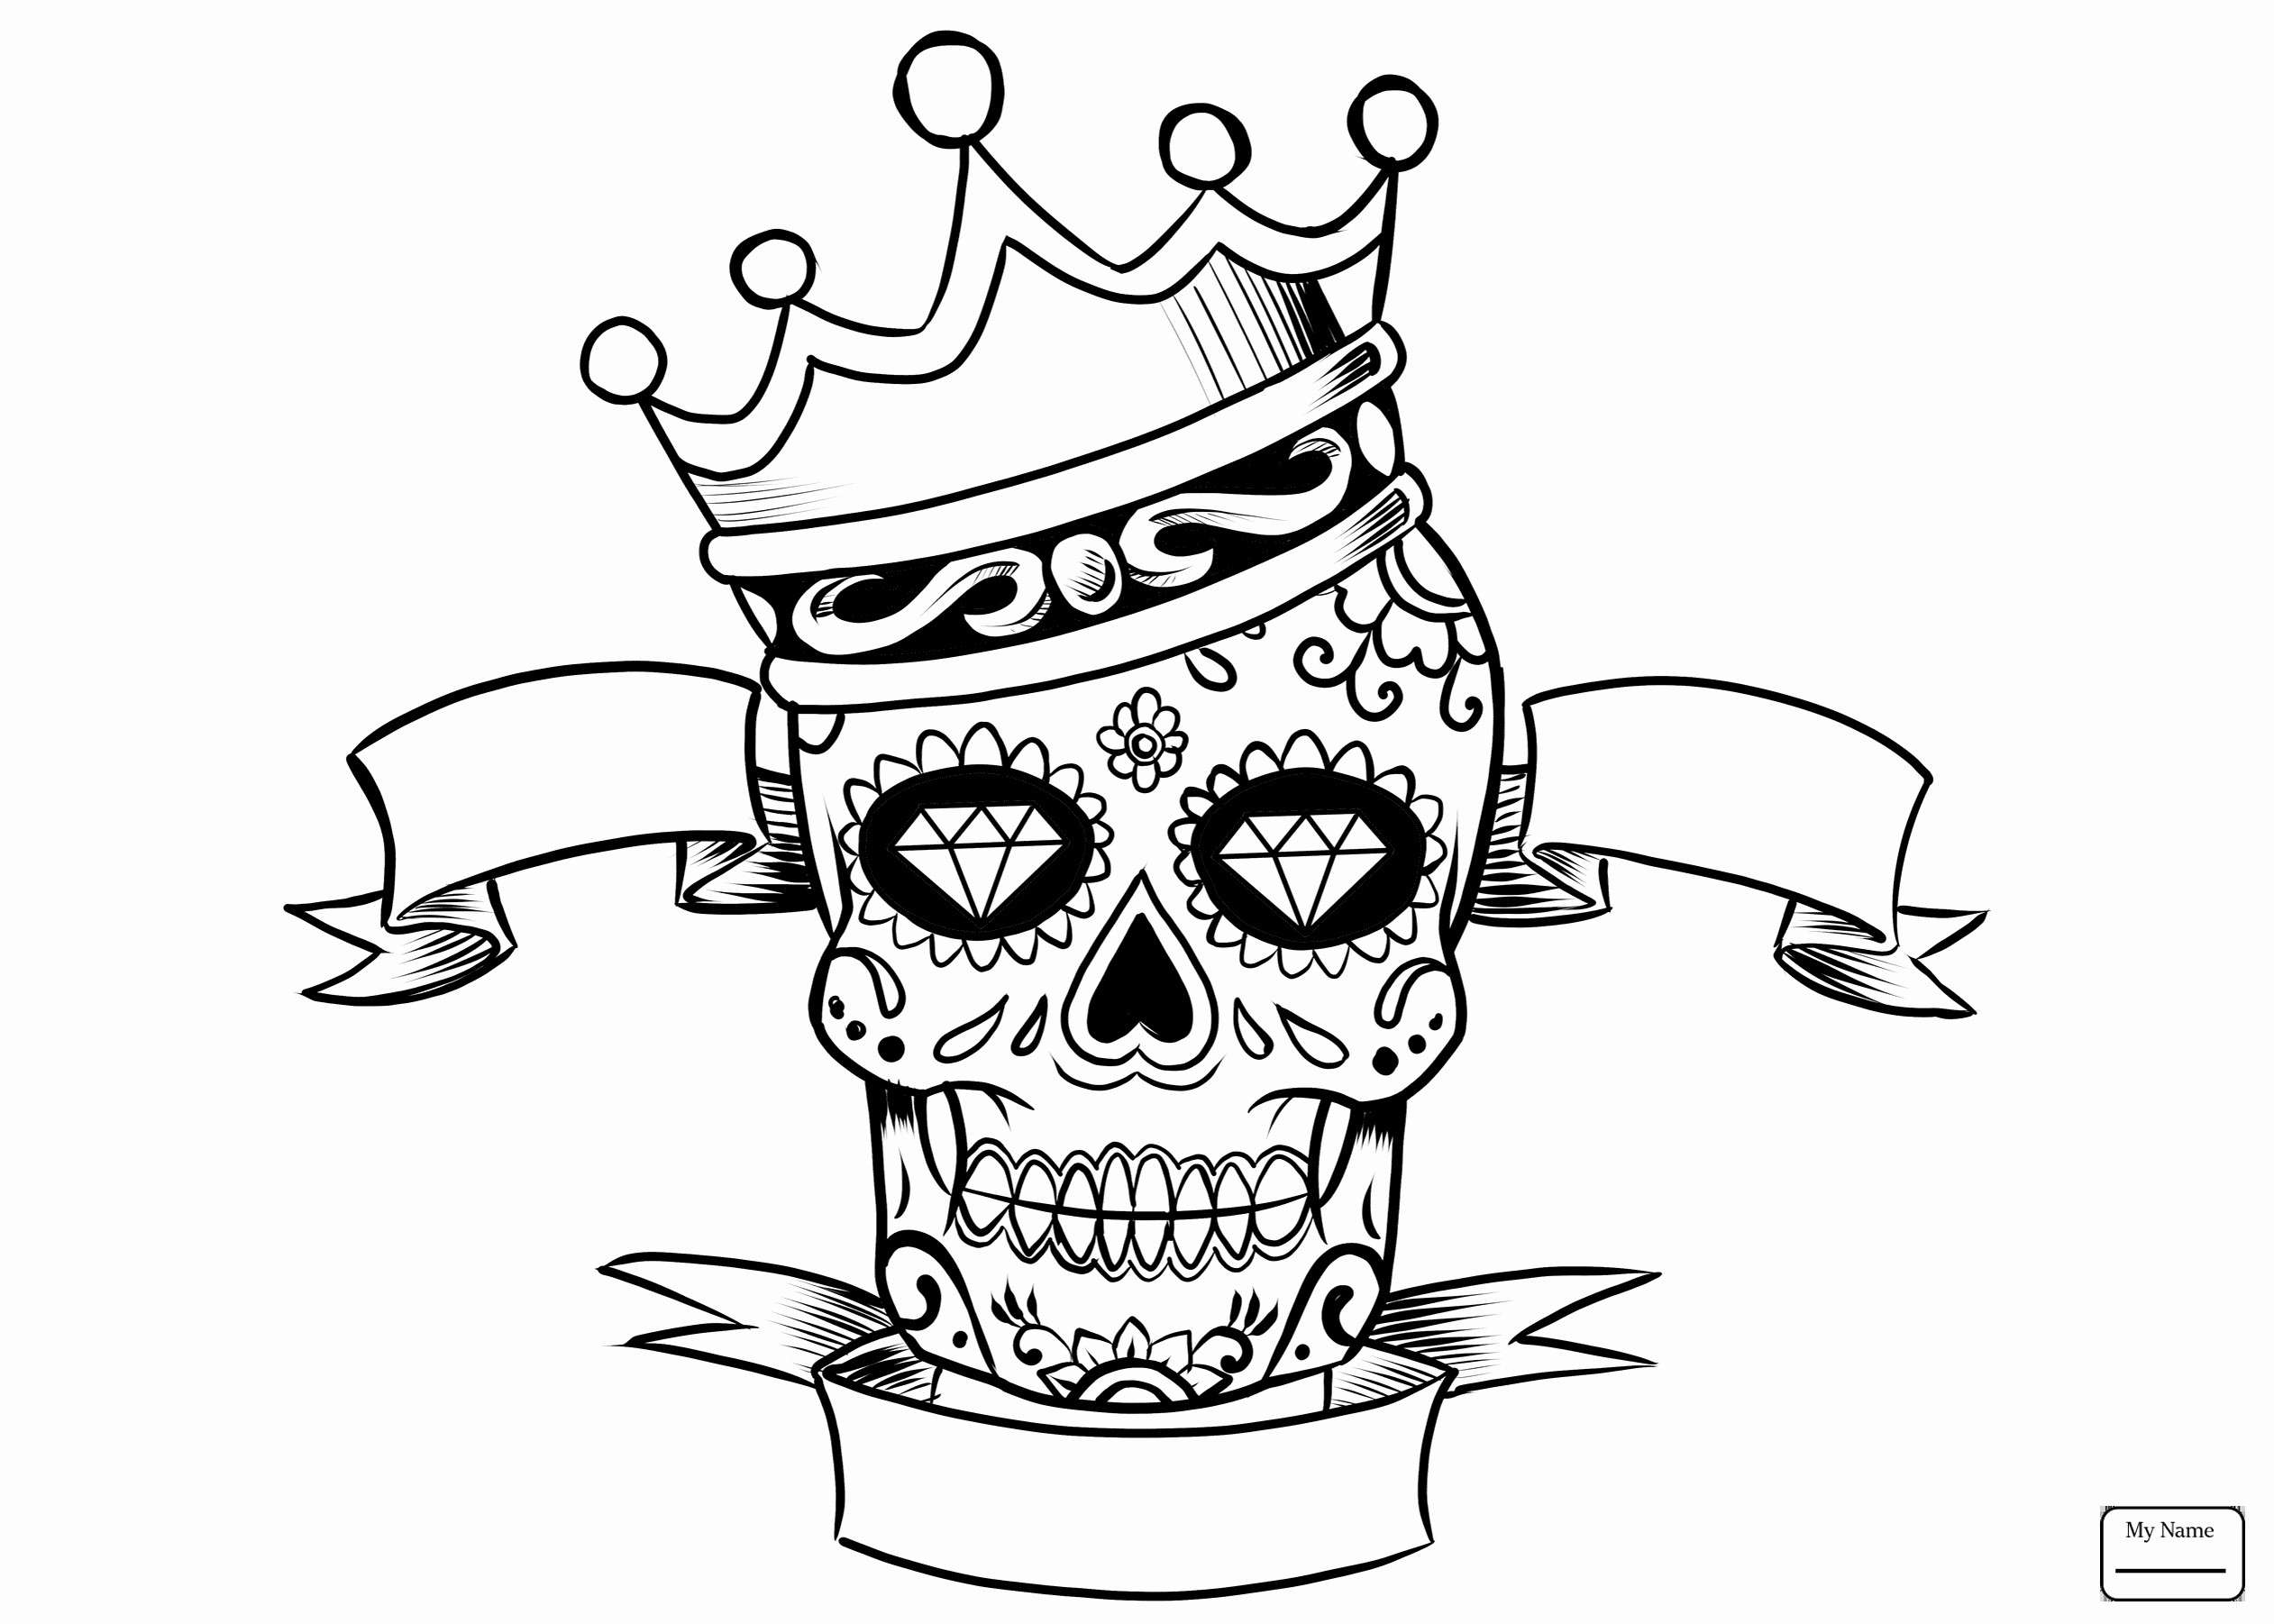 Skull Coloring Pages For Adults 10